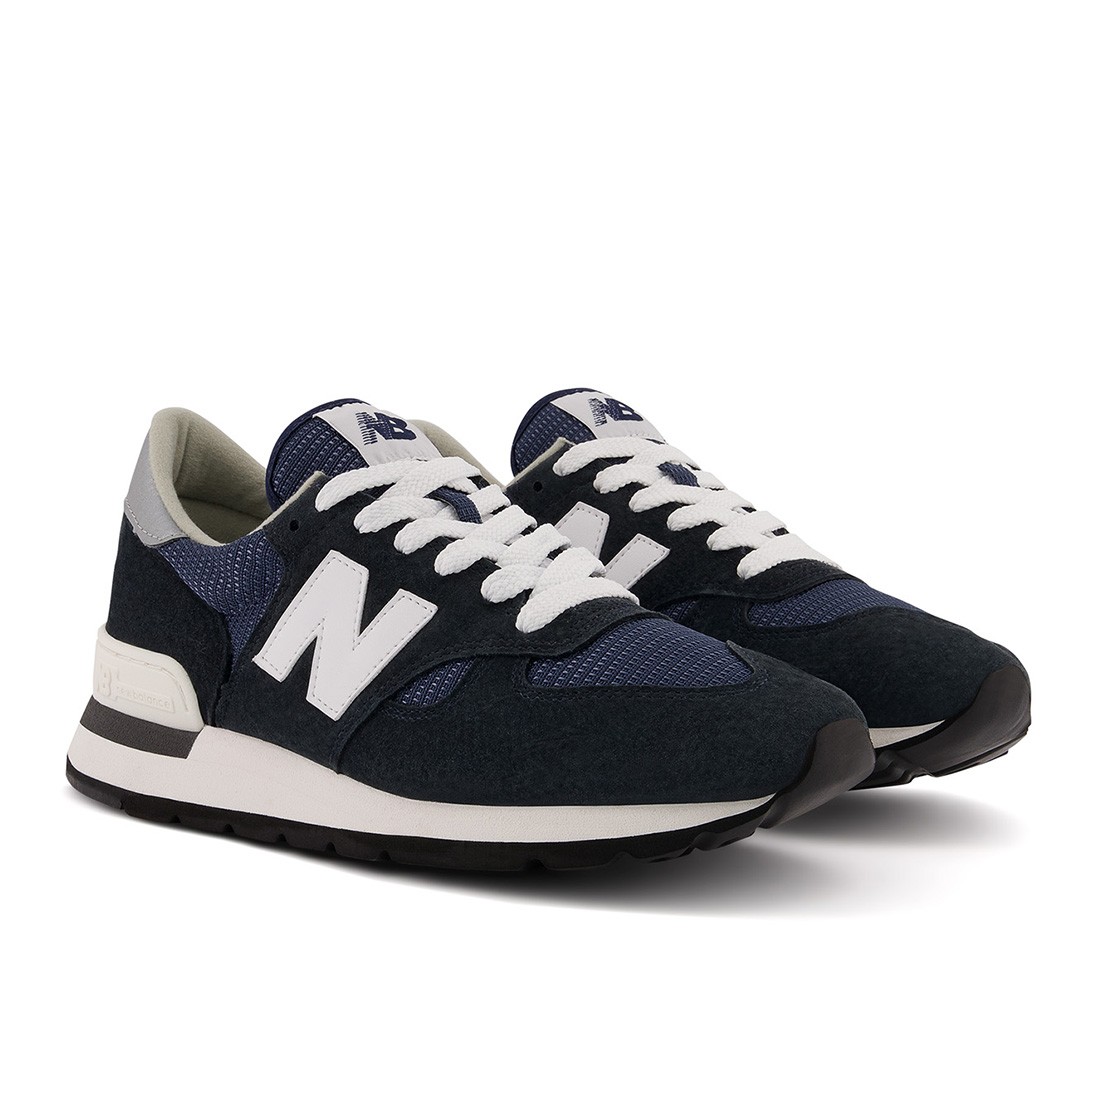 The Todd Snyder x New Balance 992 From Away Sold Out Quickly but You Can Still Buy a Pair